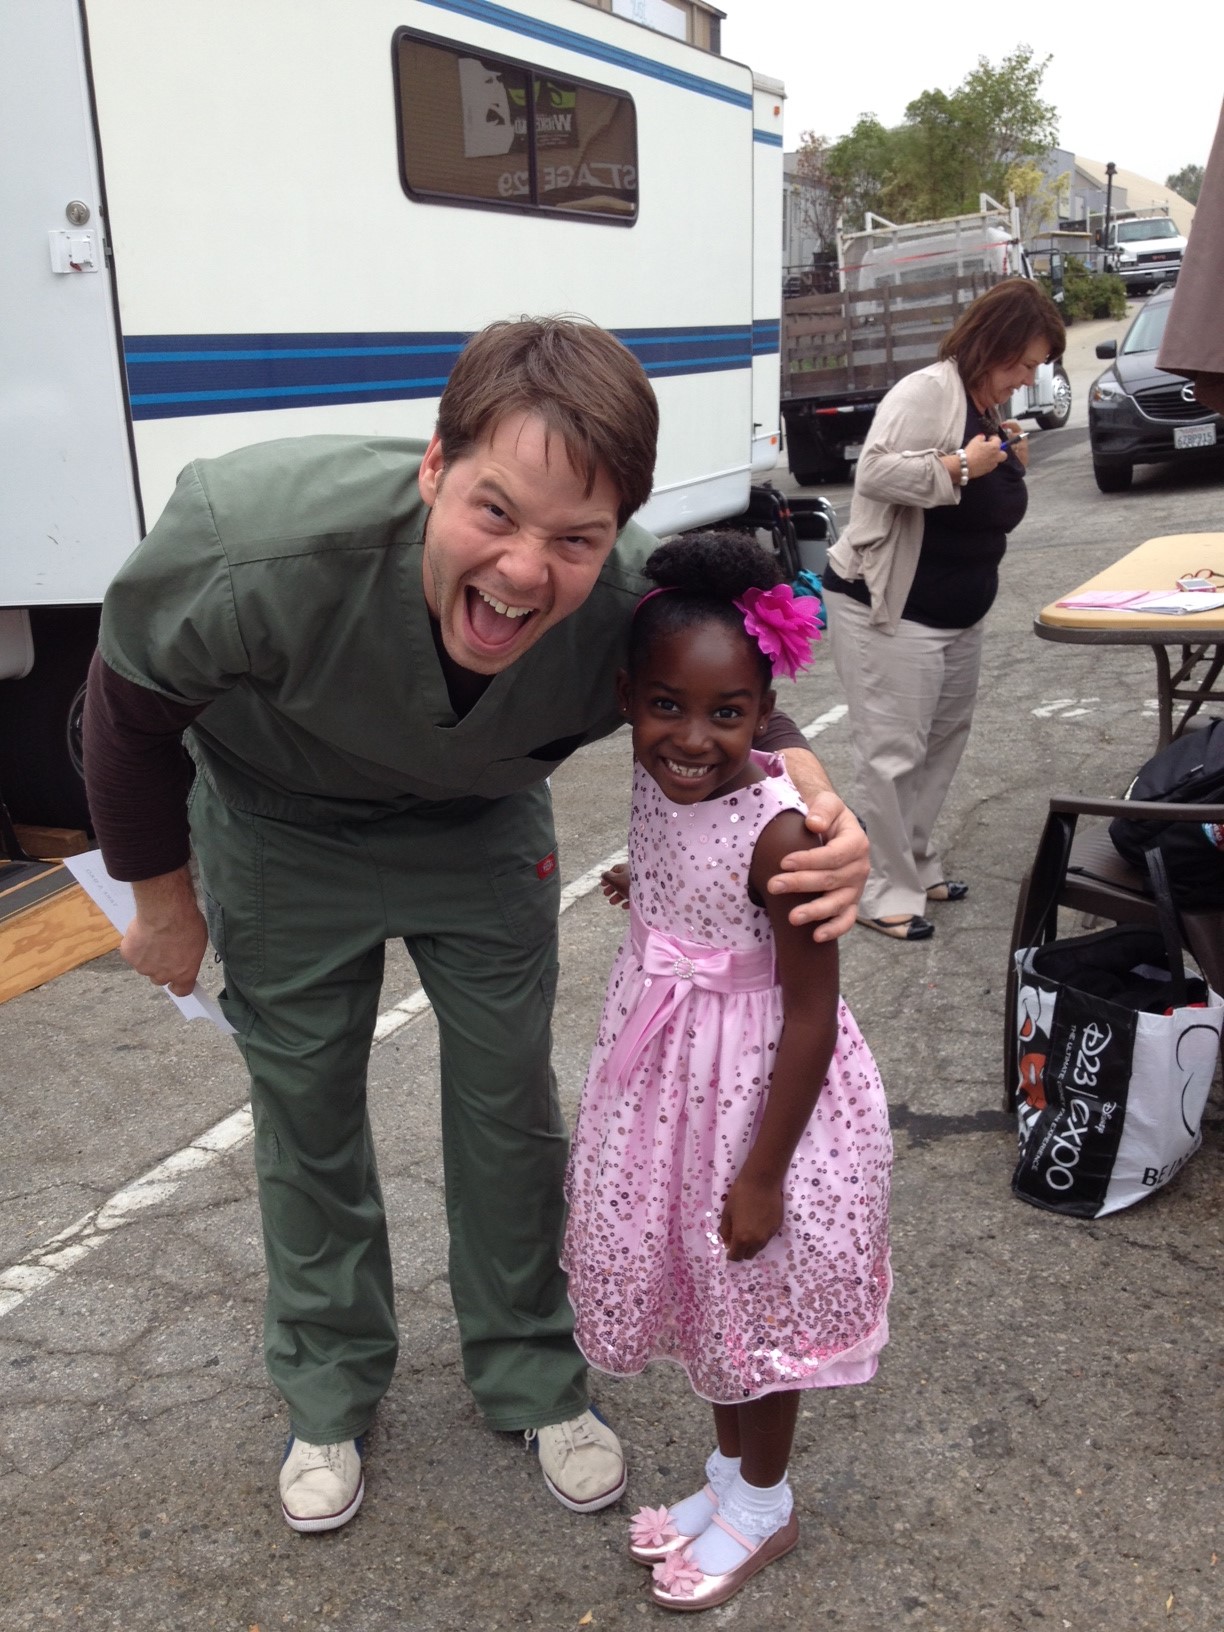 Hanging with Ike Barunholtz on the set of The Mindy Project! Love Fox